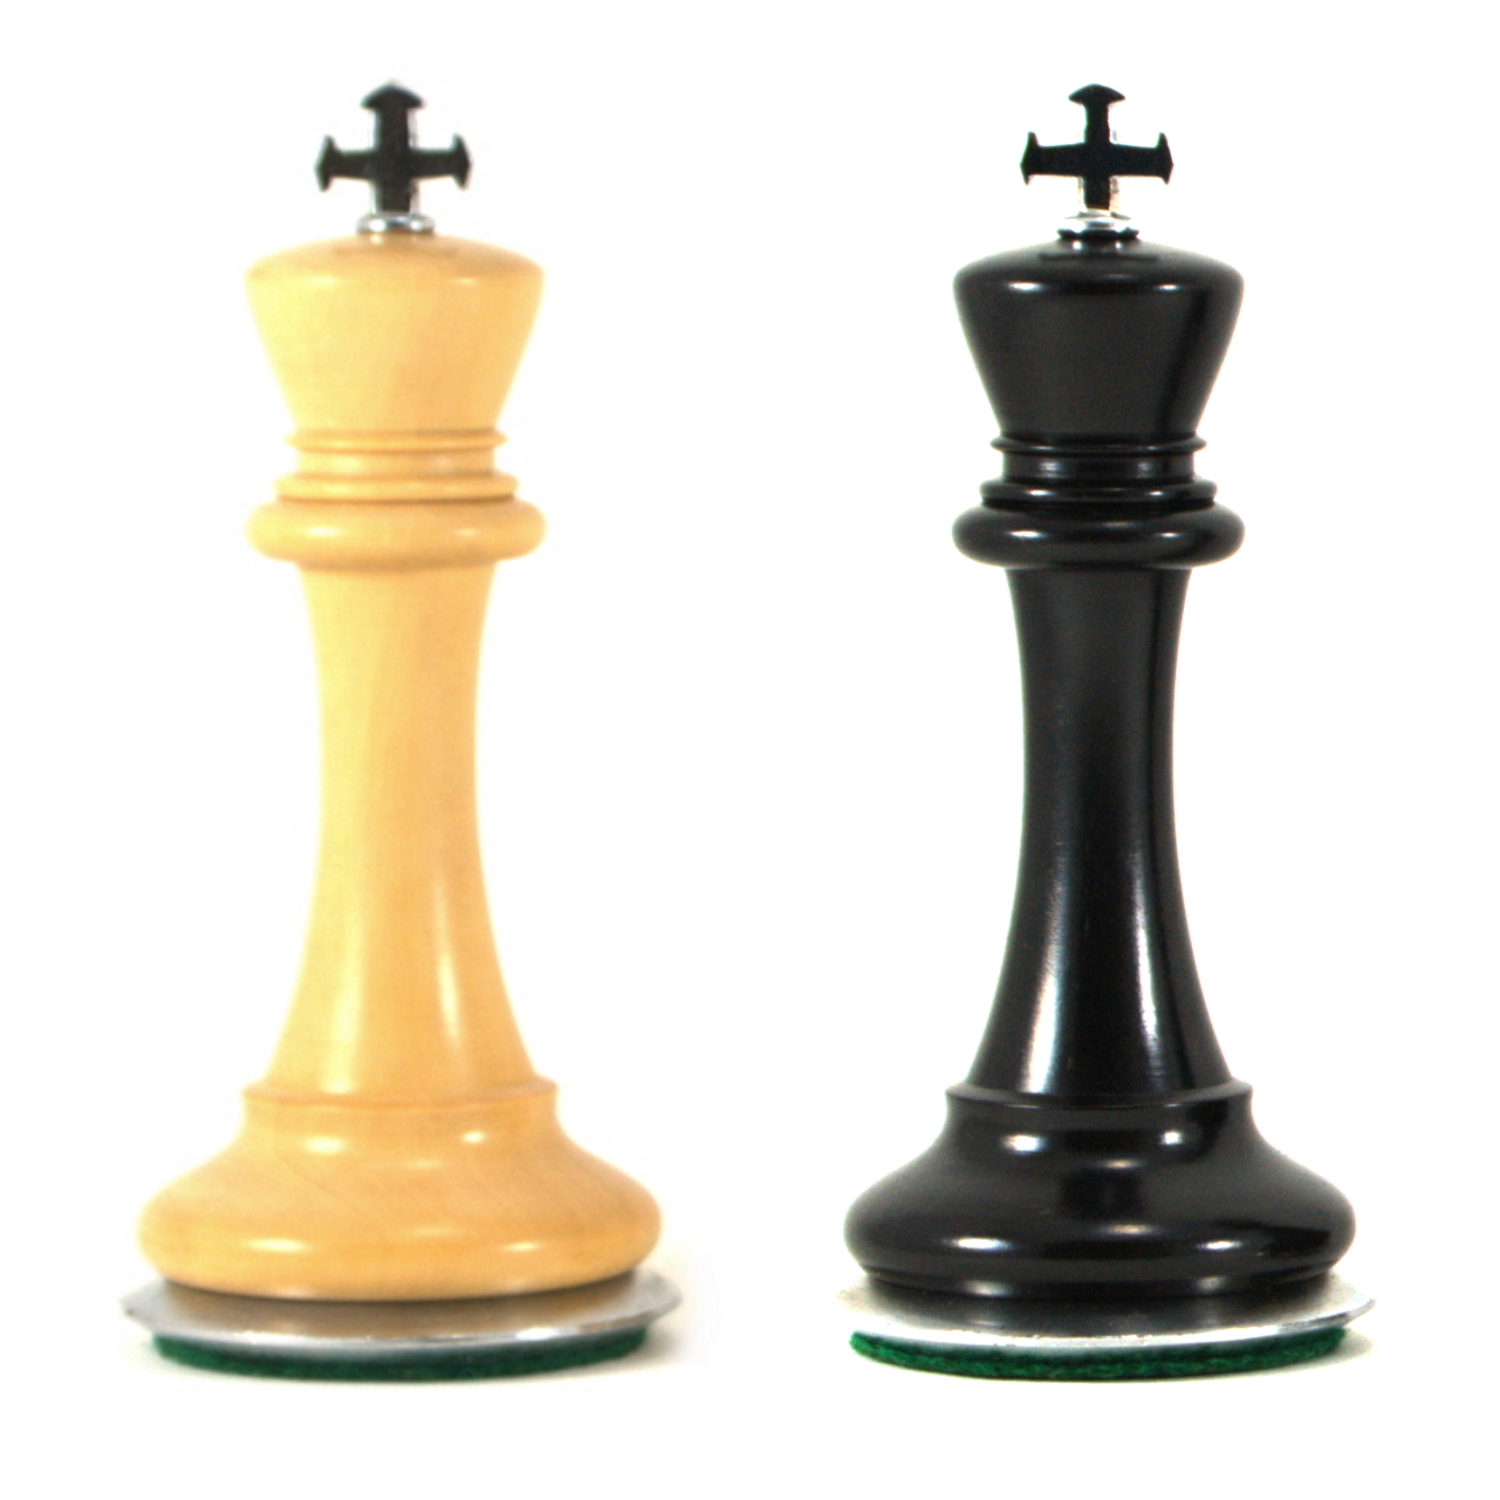 Replacement white weighted chess pieces queen, 2 rooks, 2 bishops, felt  bottoms